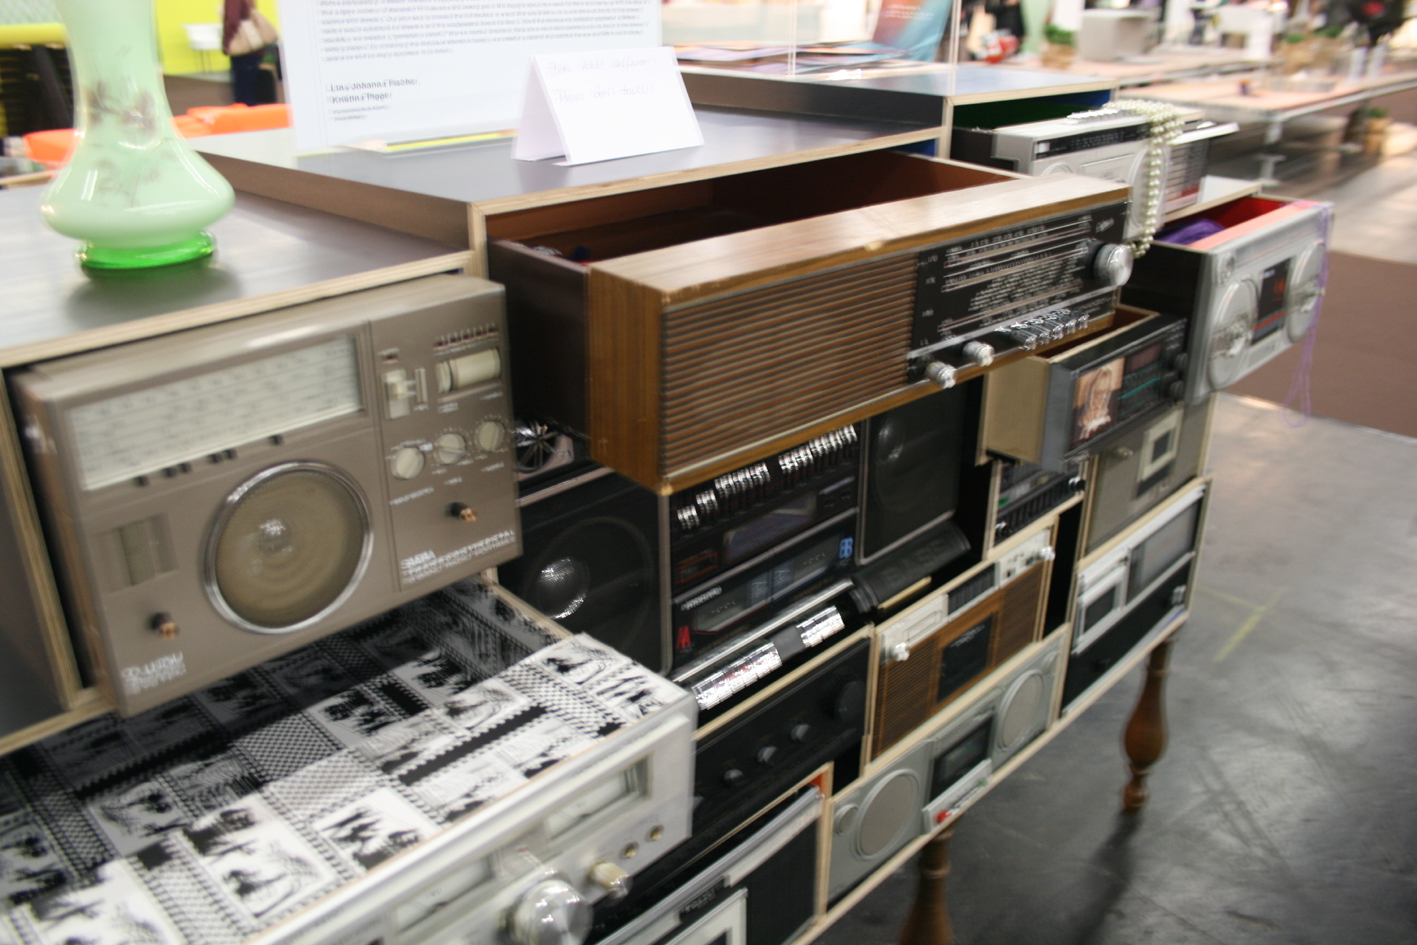 “My favourite was the striking storage cabinet constructed from hollowed-out old music players pictured. Tape decks, ghetto-blasters and CD consoles – all of which are largely obsolete music delivery systems these days – served to underline the transitory nature of many household goods over the past thirty years.”